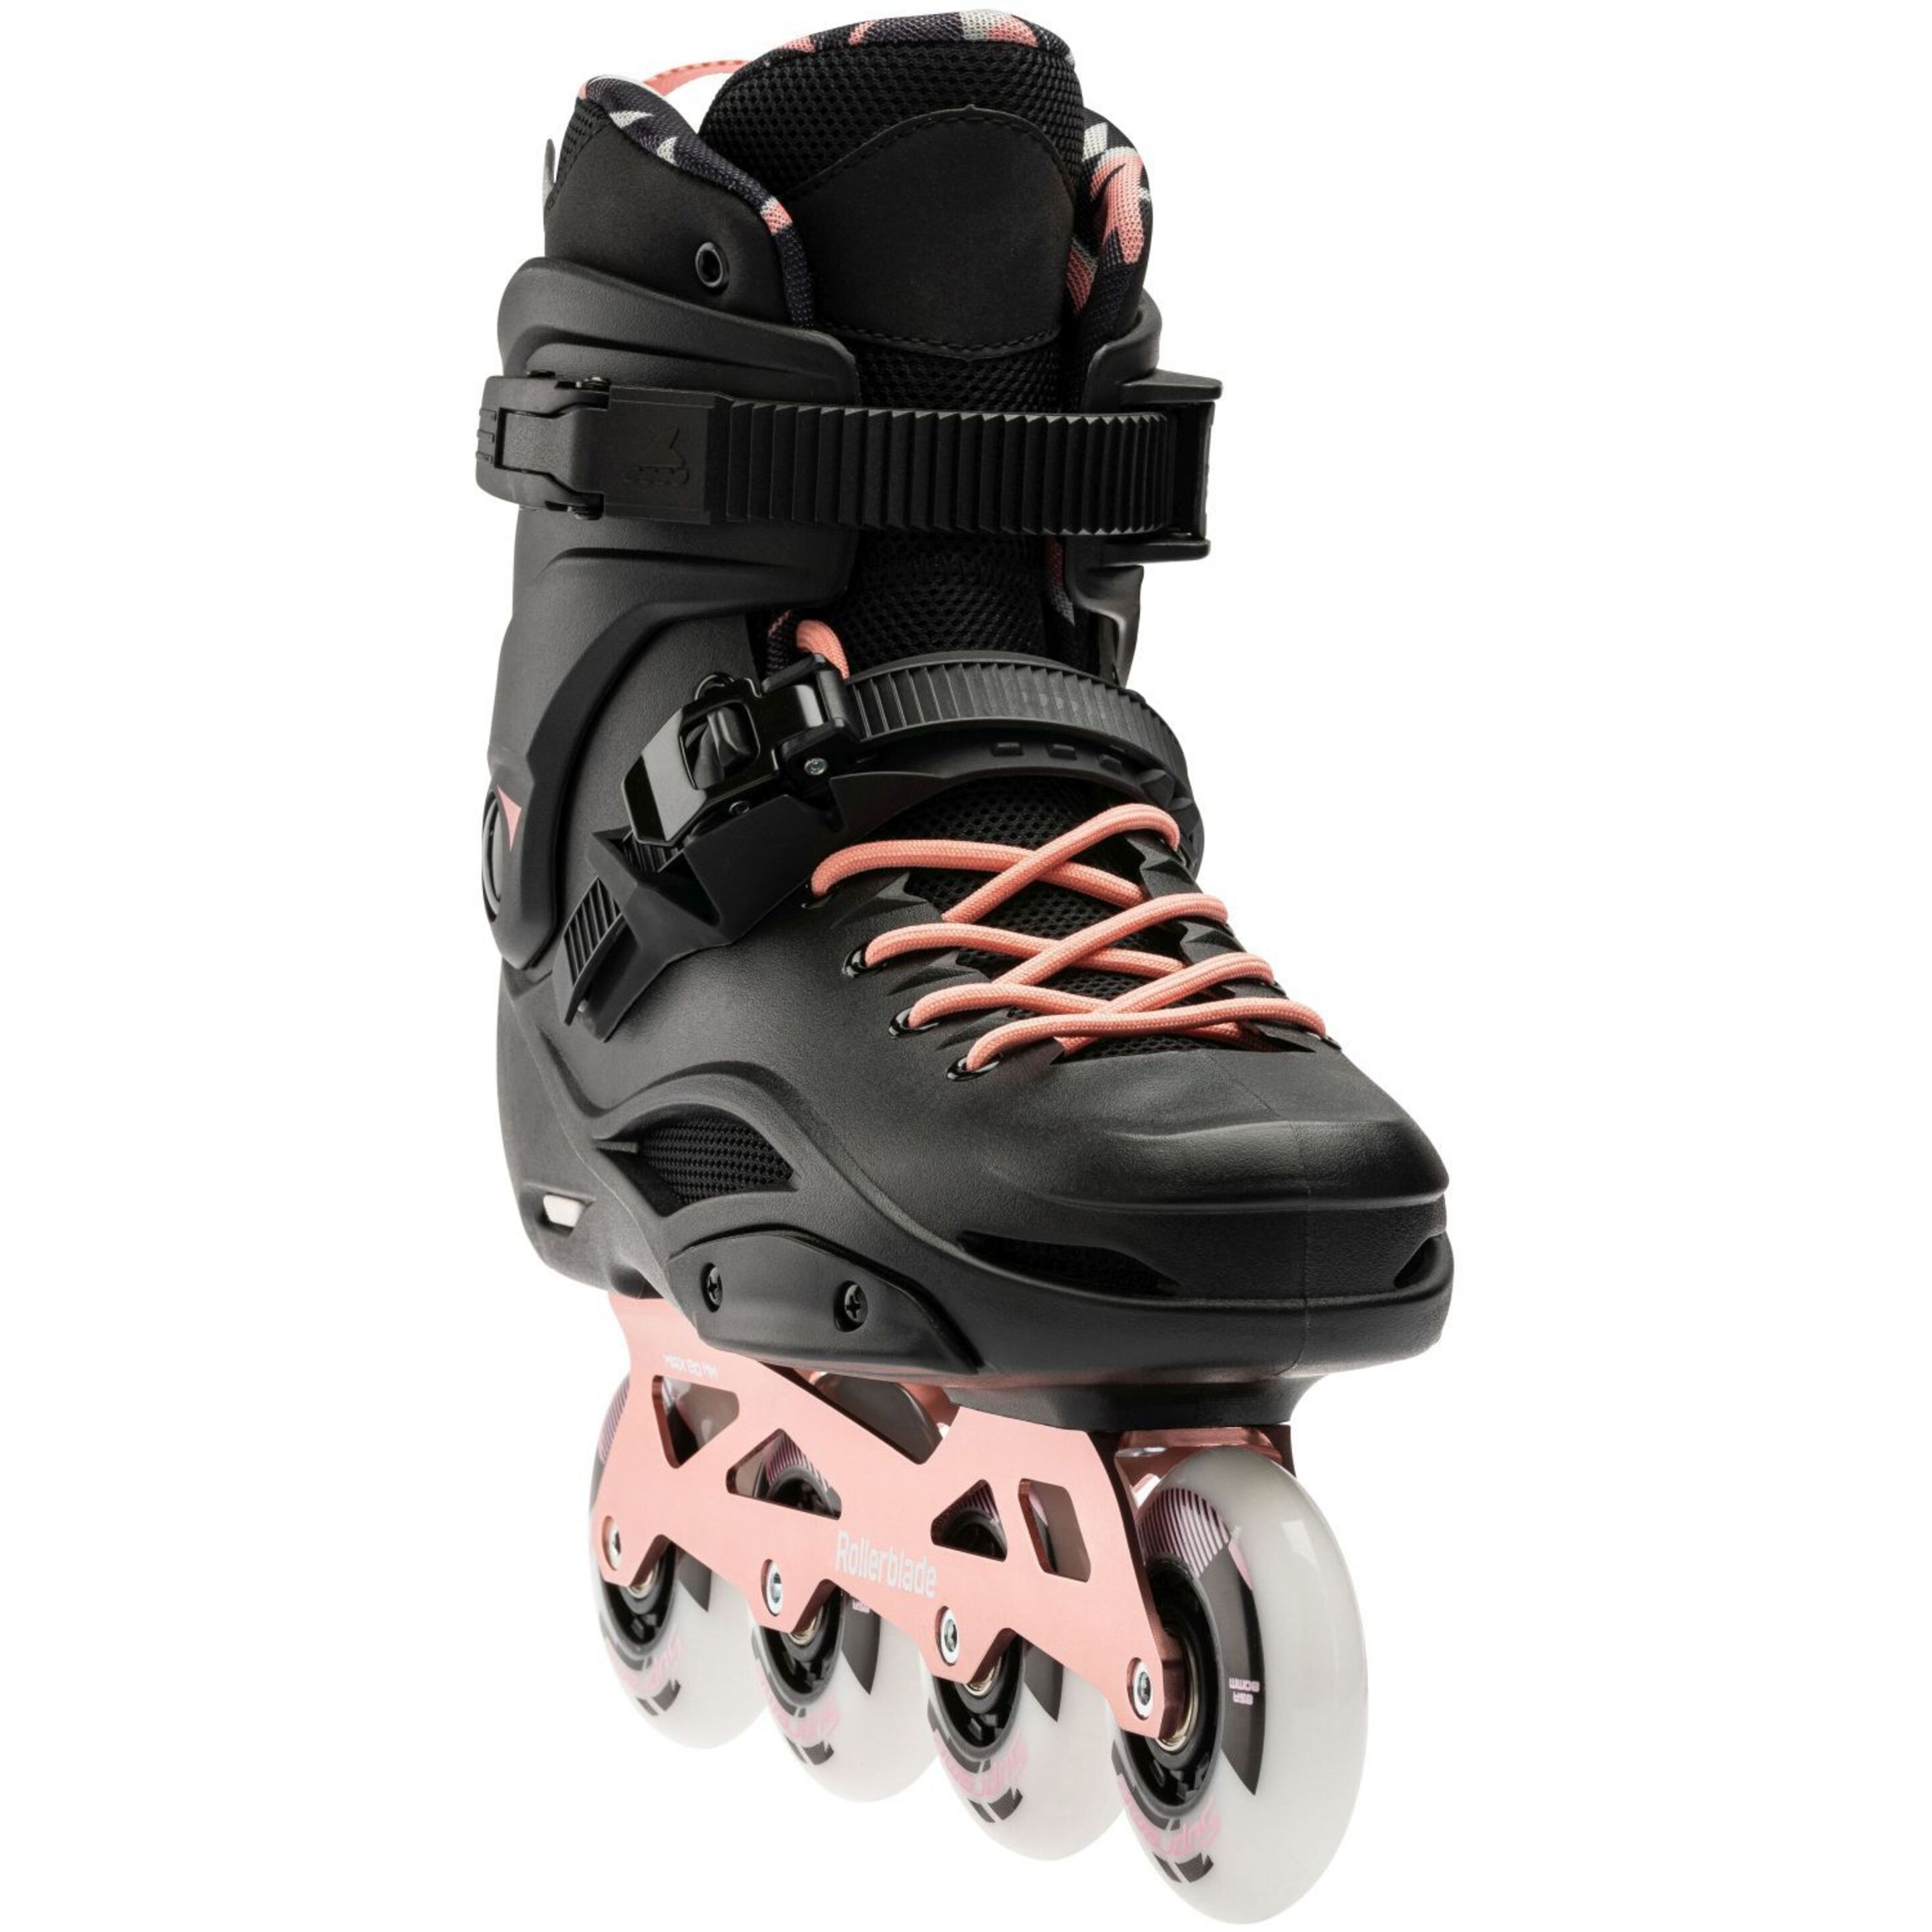 Patines Rb Pro X W Rollerblade